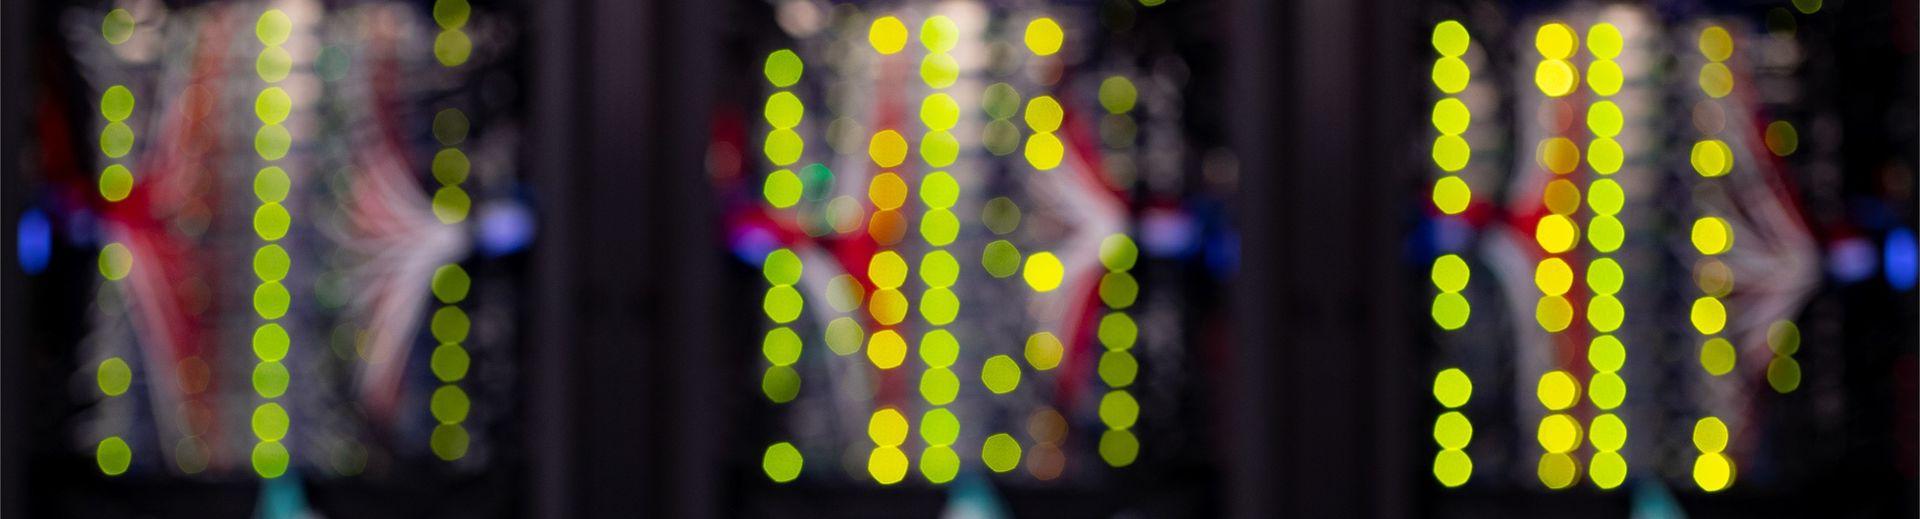 Blurred image of 的 back of computer servers resulting in a very primary colorscape with columns of bright yellow circles.